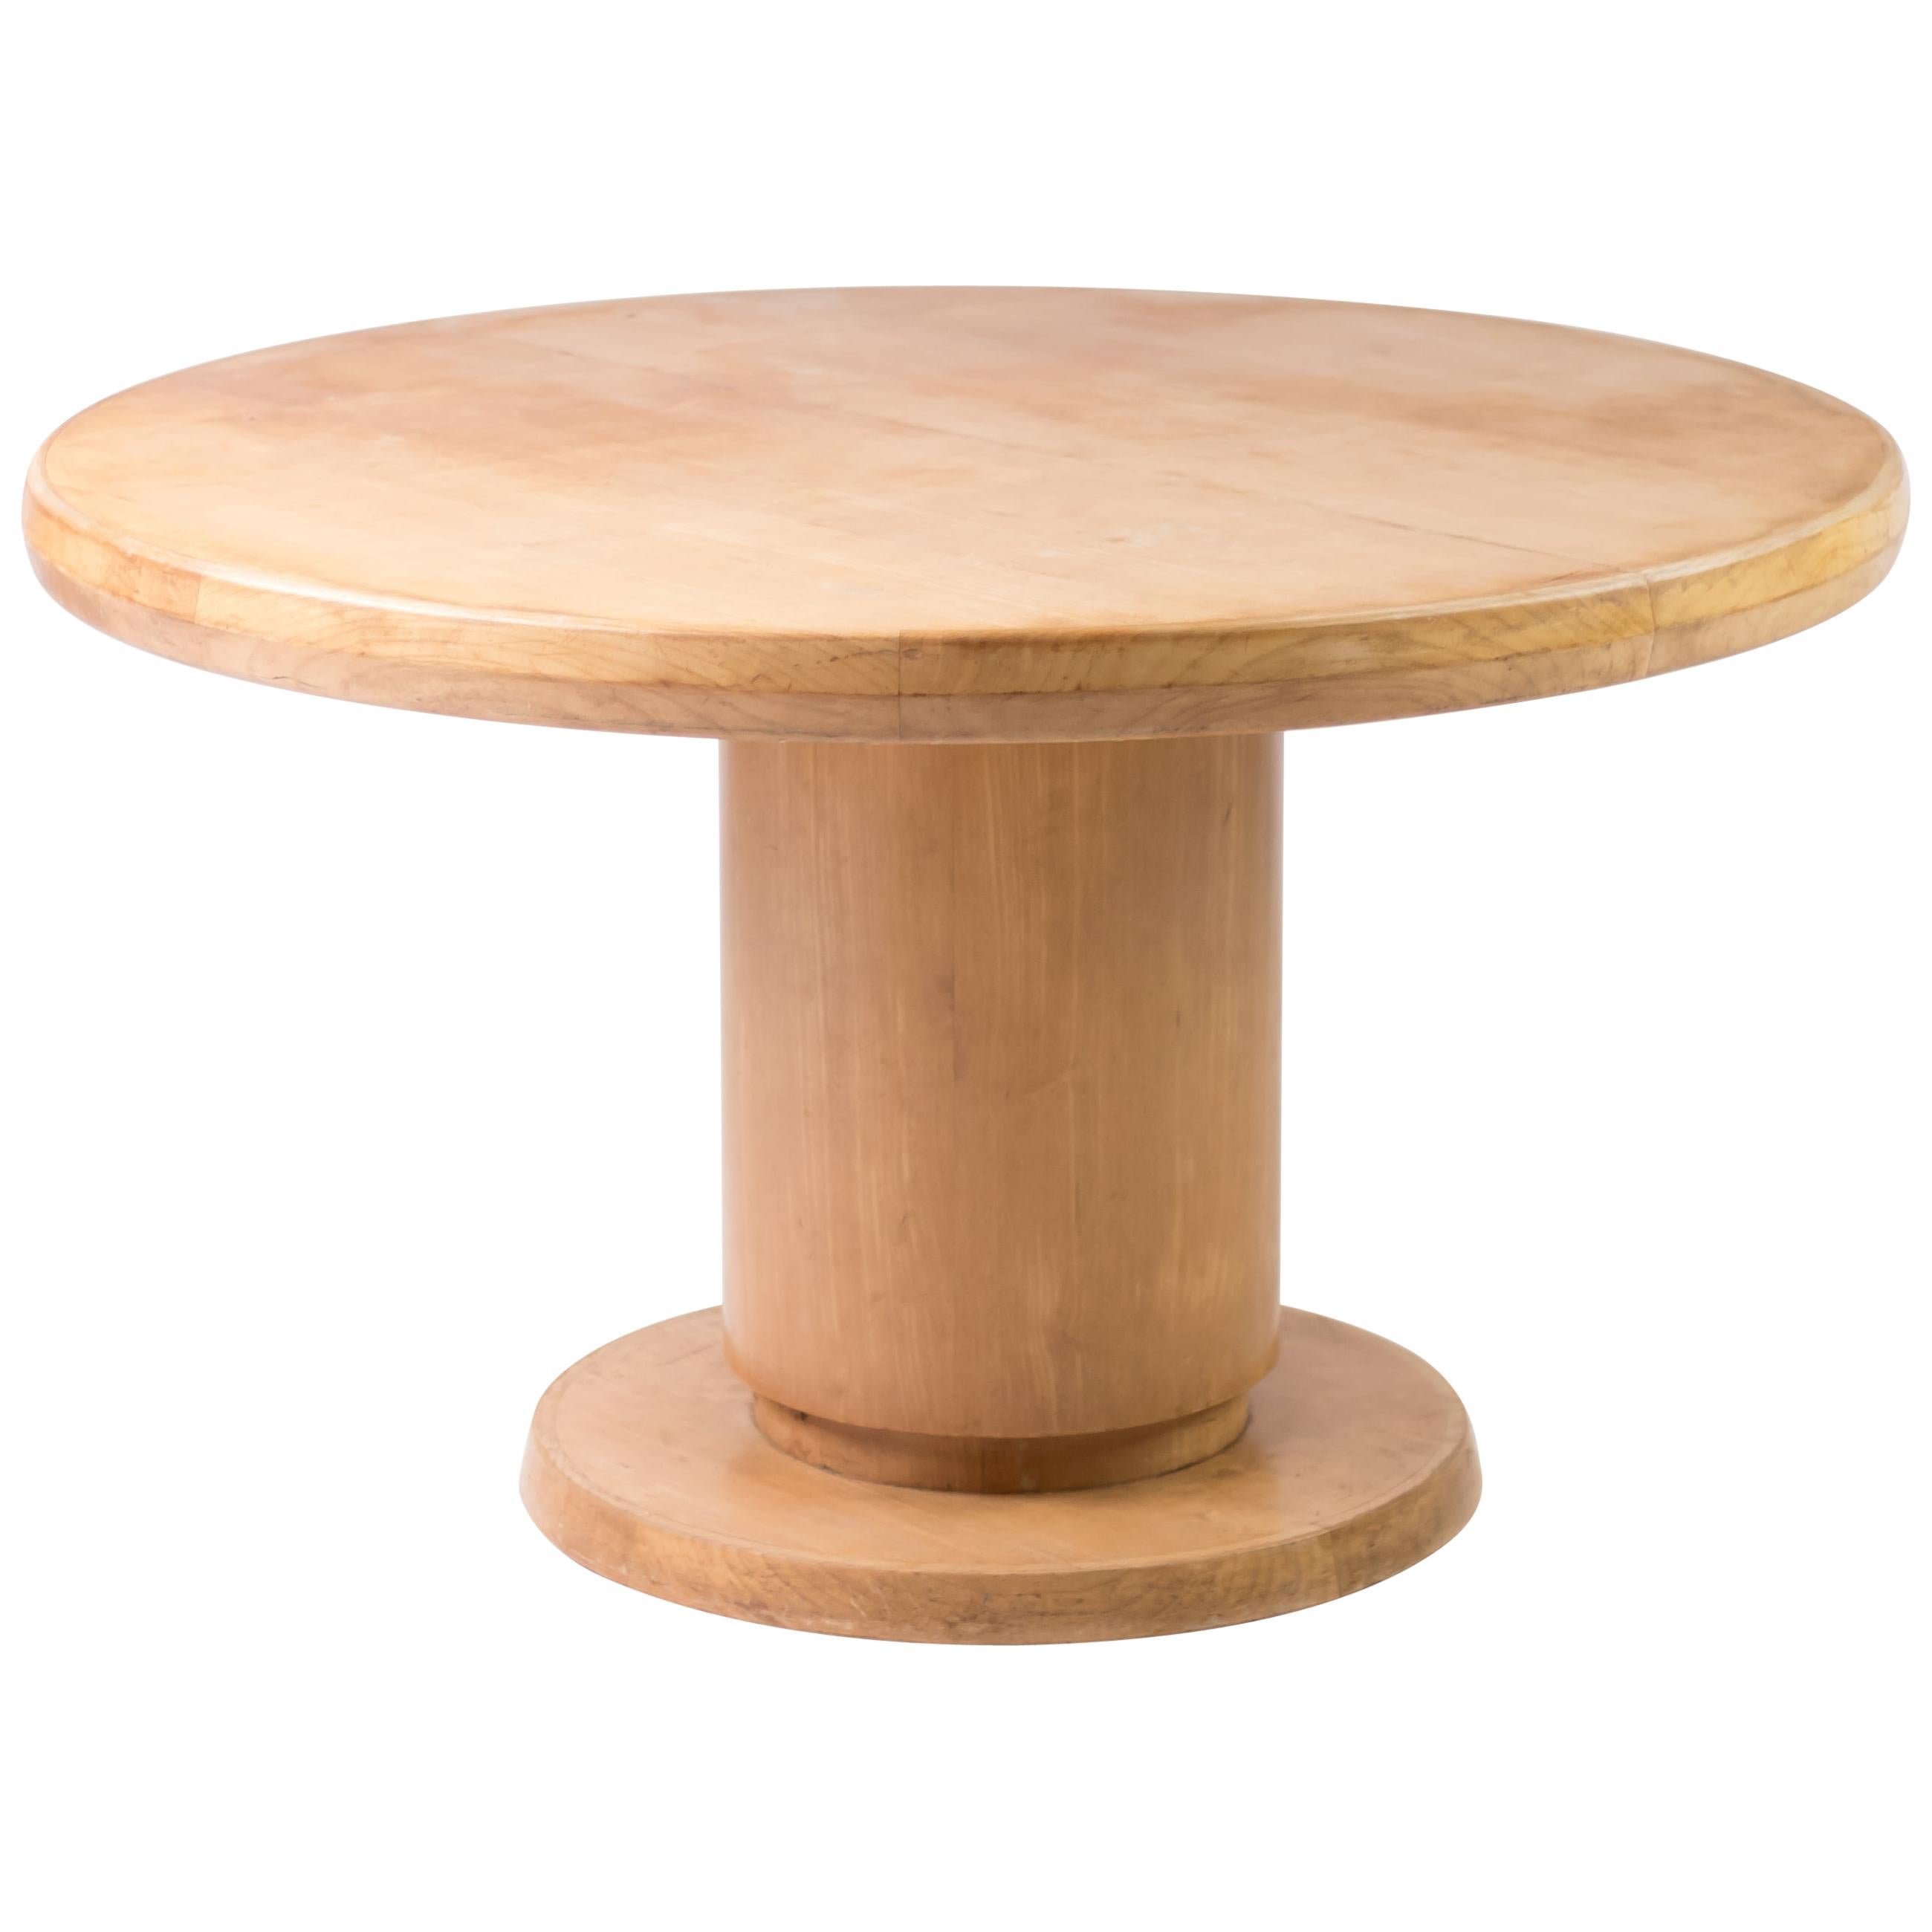 Architectural Extendable Circular Dining Table